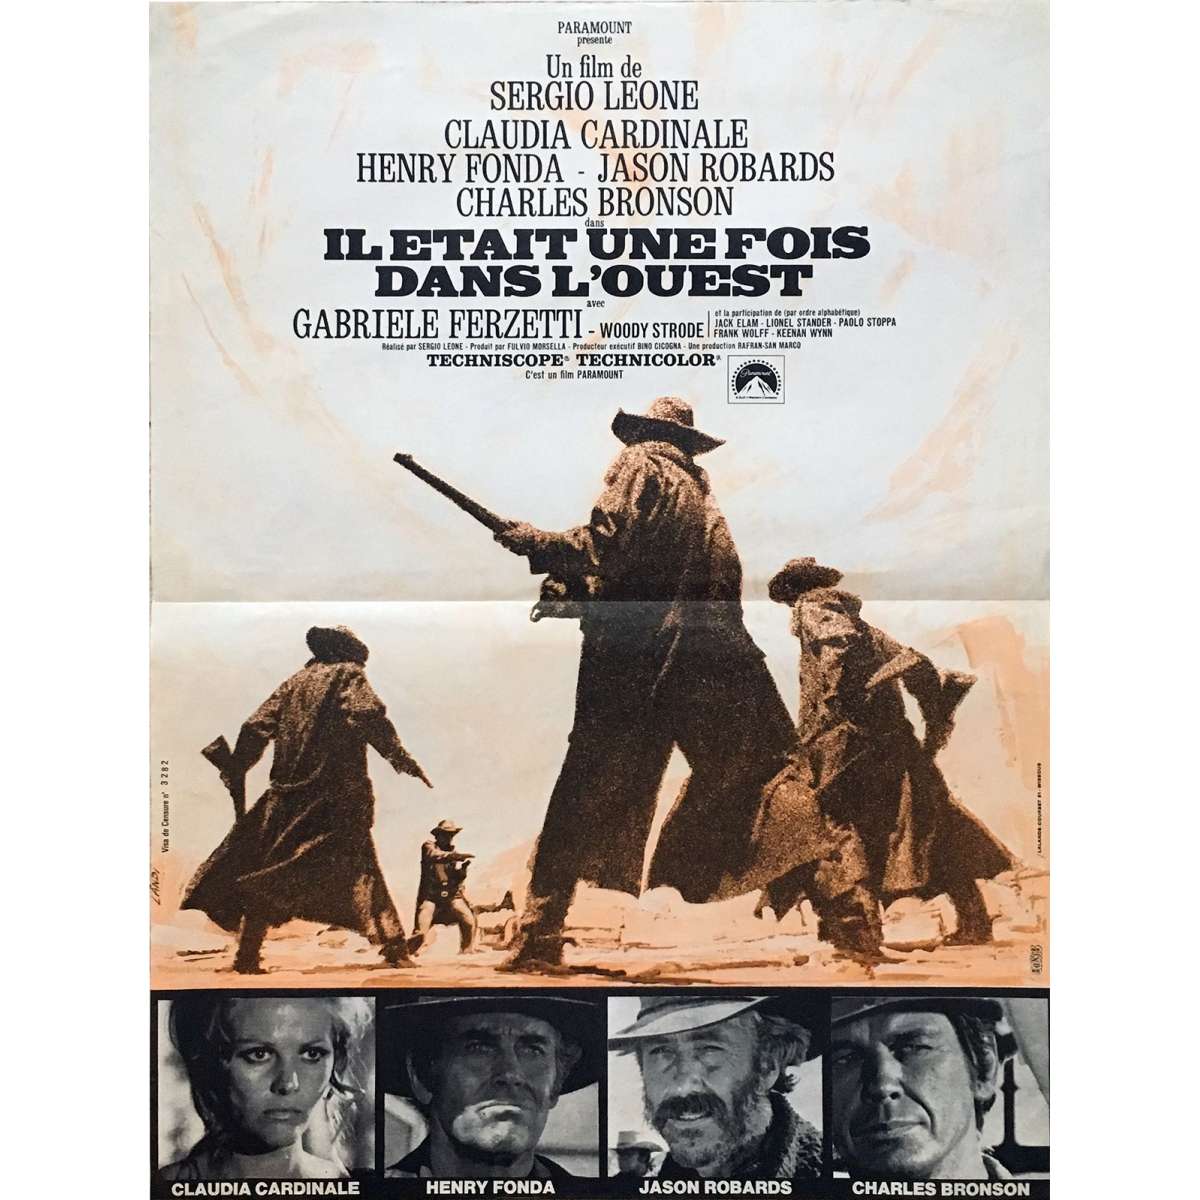 once-upon-a-time-in-the-west-rare-1st-release-movie-poster-15x21-in-1968-sergio-leone-henry-fonda.jpg